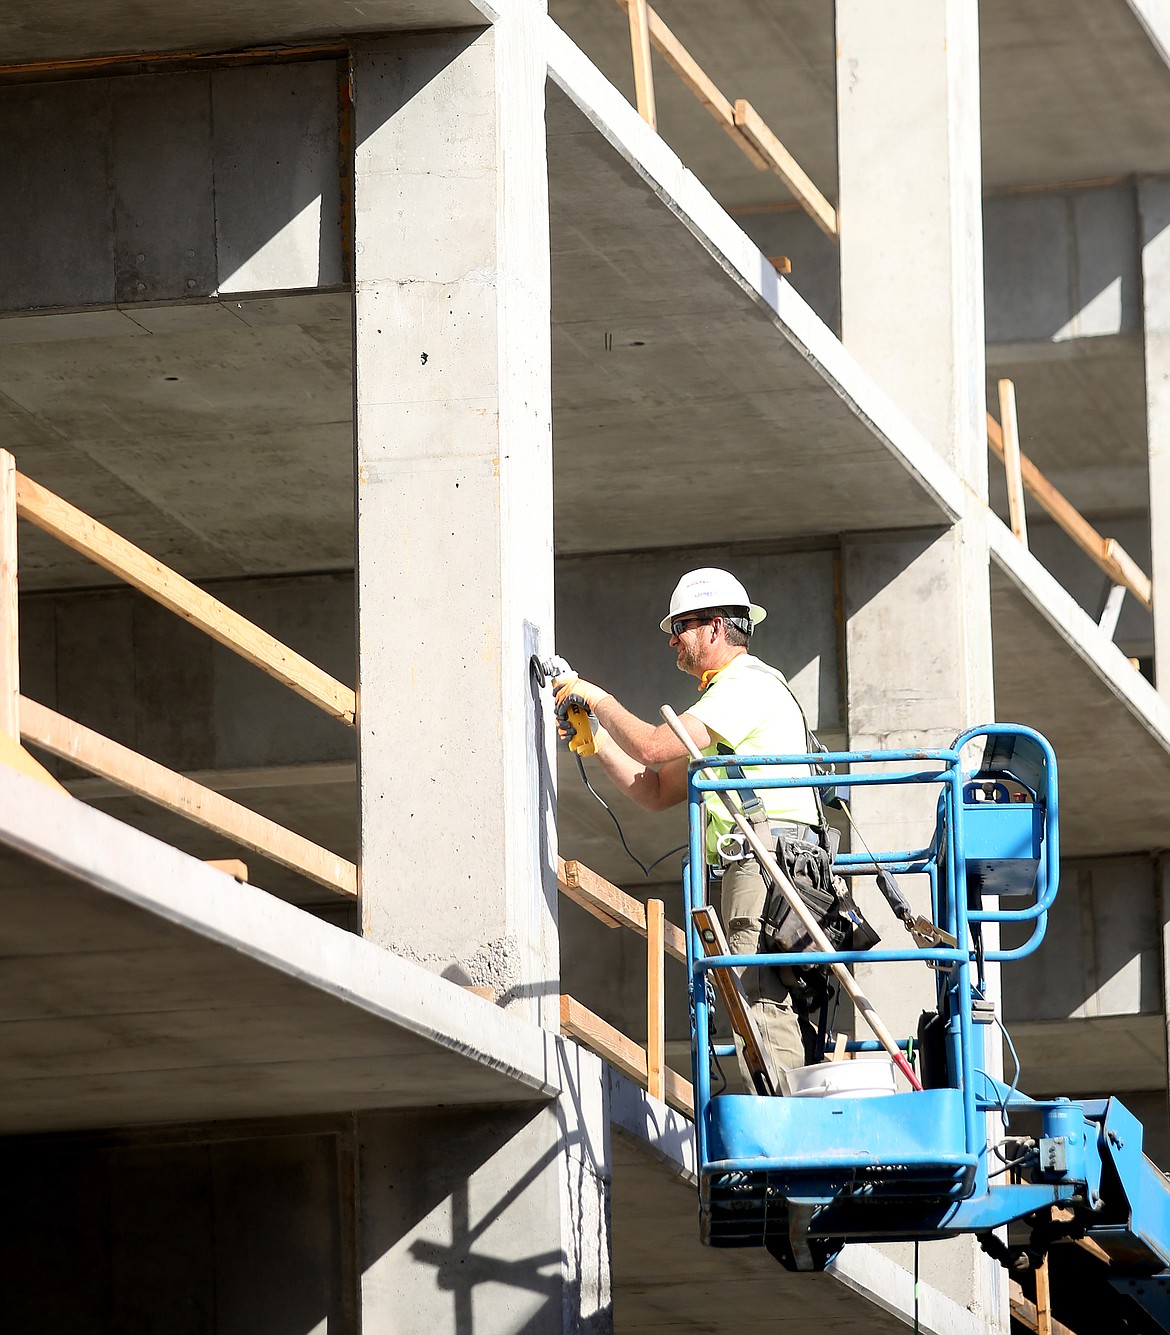 Ron Coddington with LaRiviere Construction smooths and patches a pillar last week at the new downtown parking garage. (LOREN BENOIT/Press)